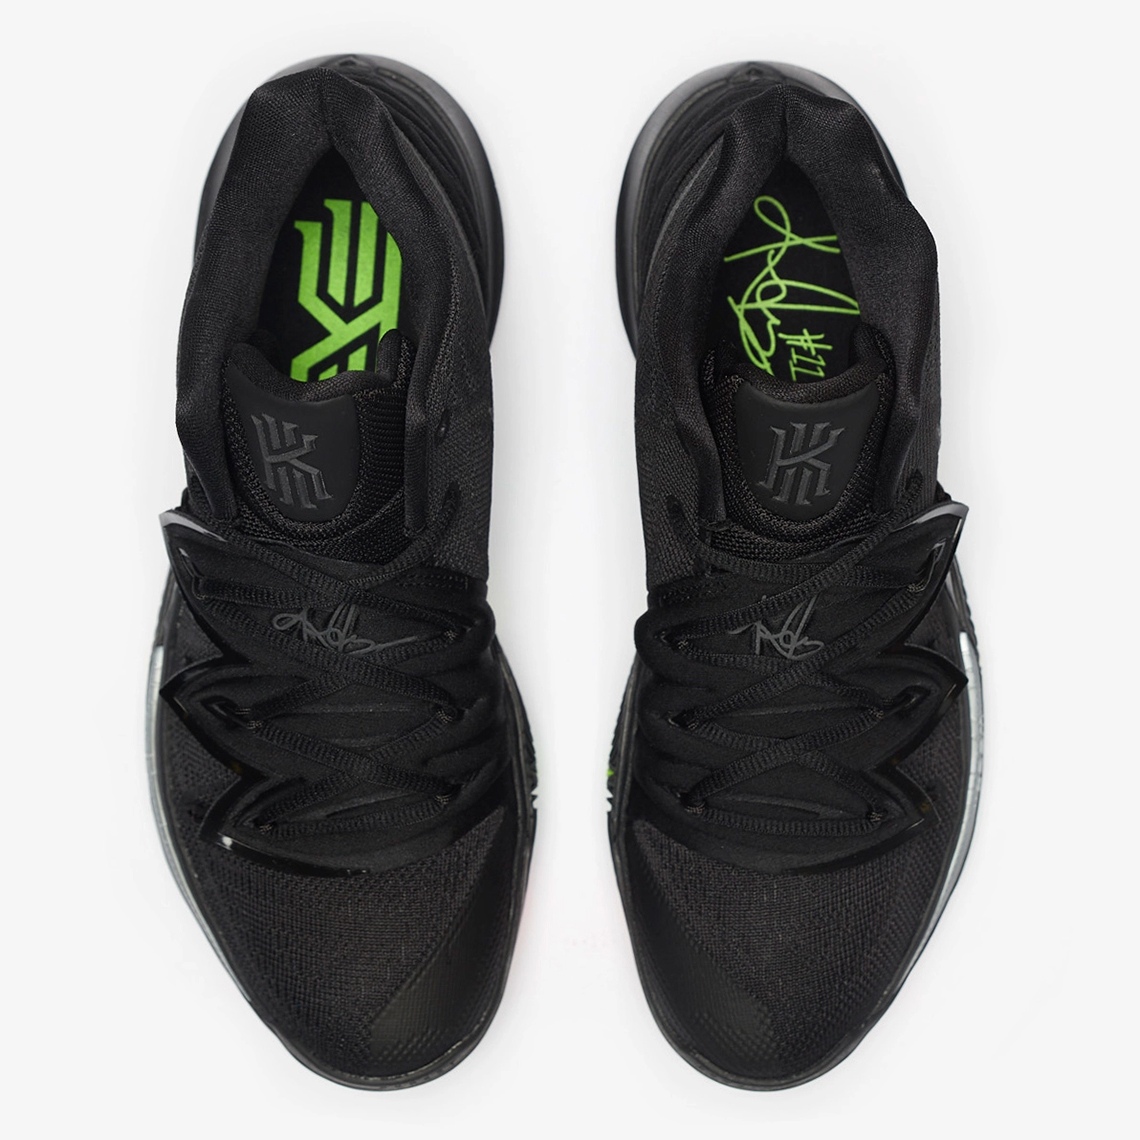 kyrie 5 outsole